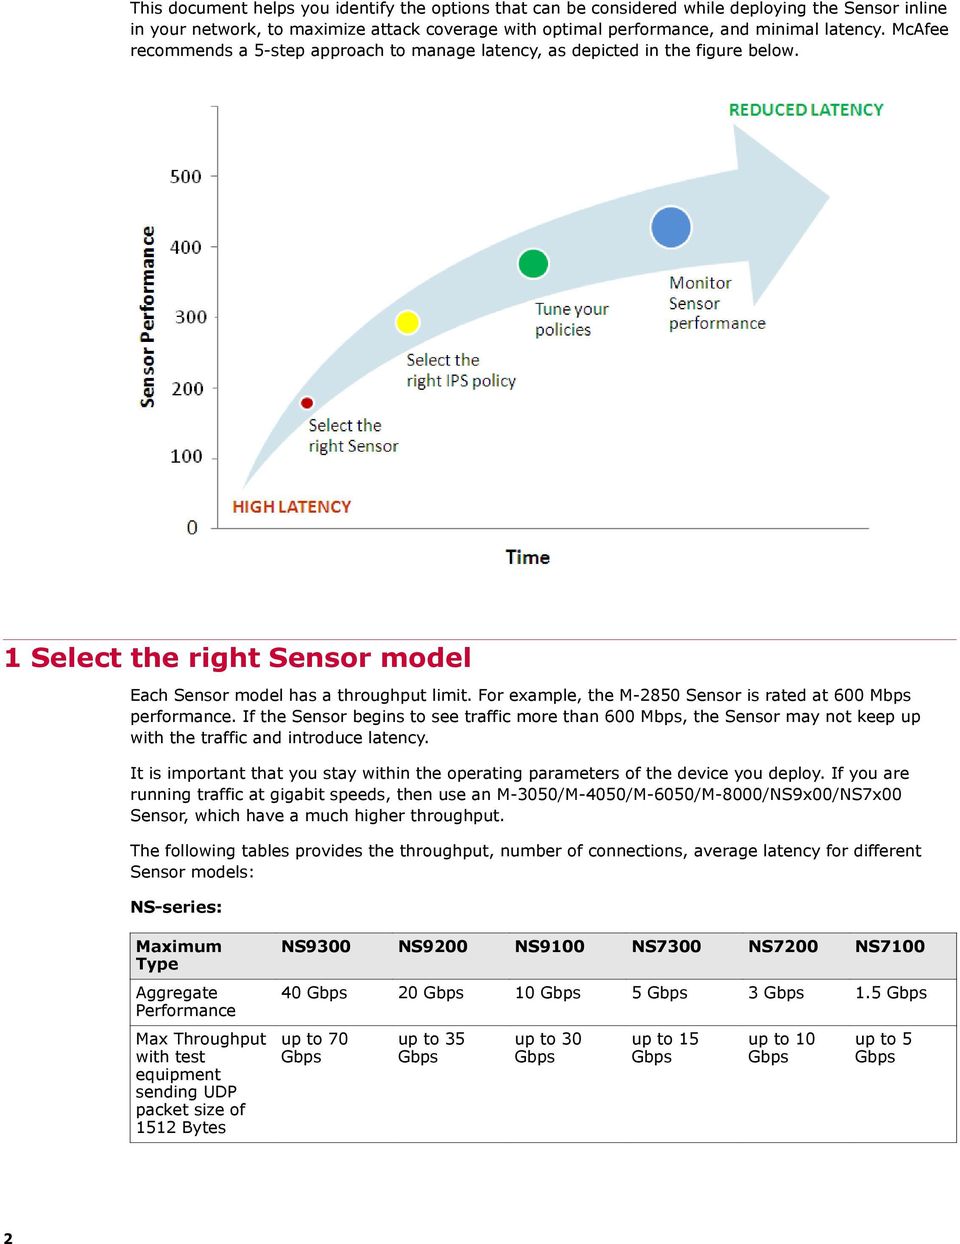 For example, the M-2850 Sensor is rated at 600 Mbps performance. If the Sensor begins to see traffic more than 600 Mbps, the Sensor may not keep up with the traffic and introduce latency.